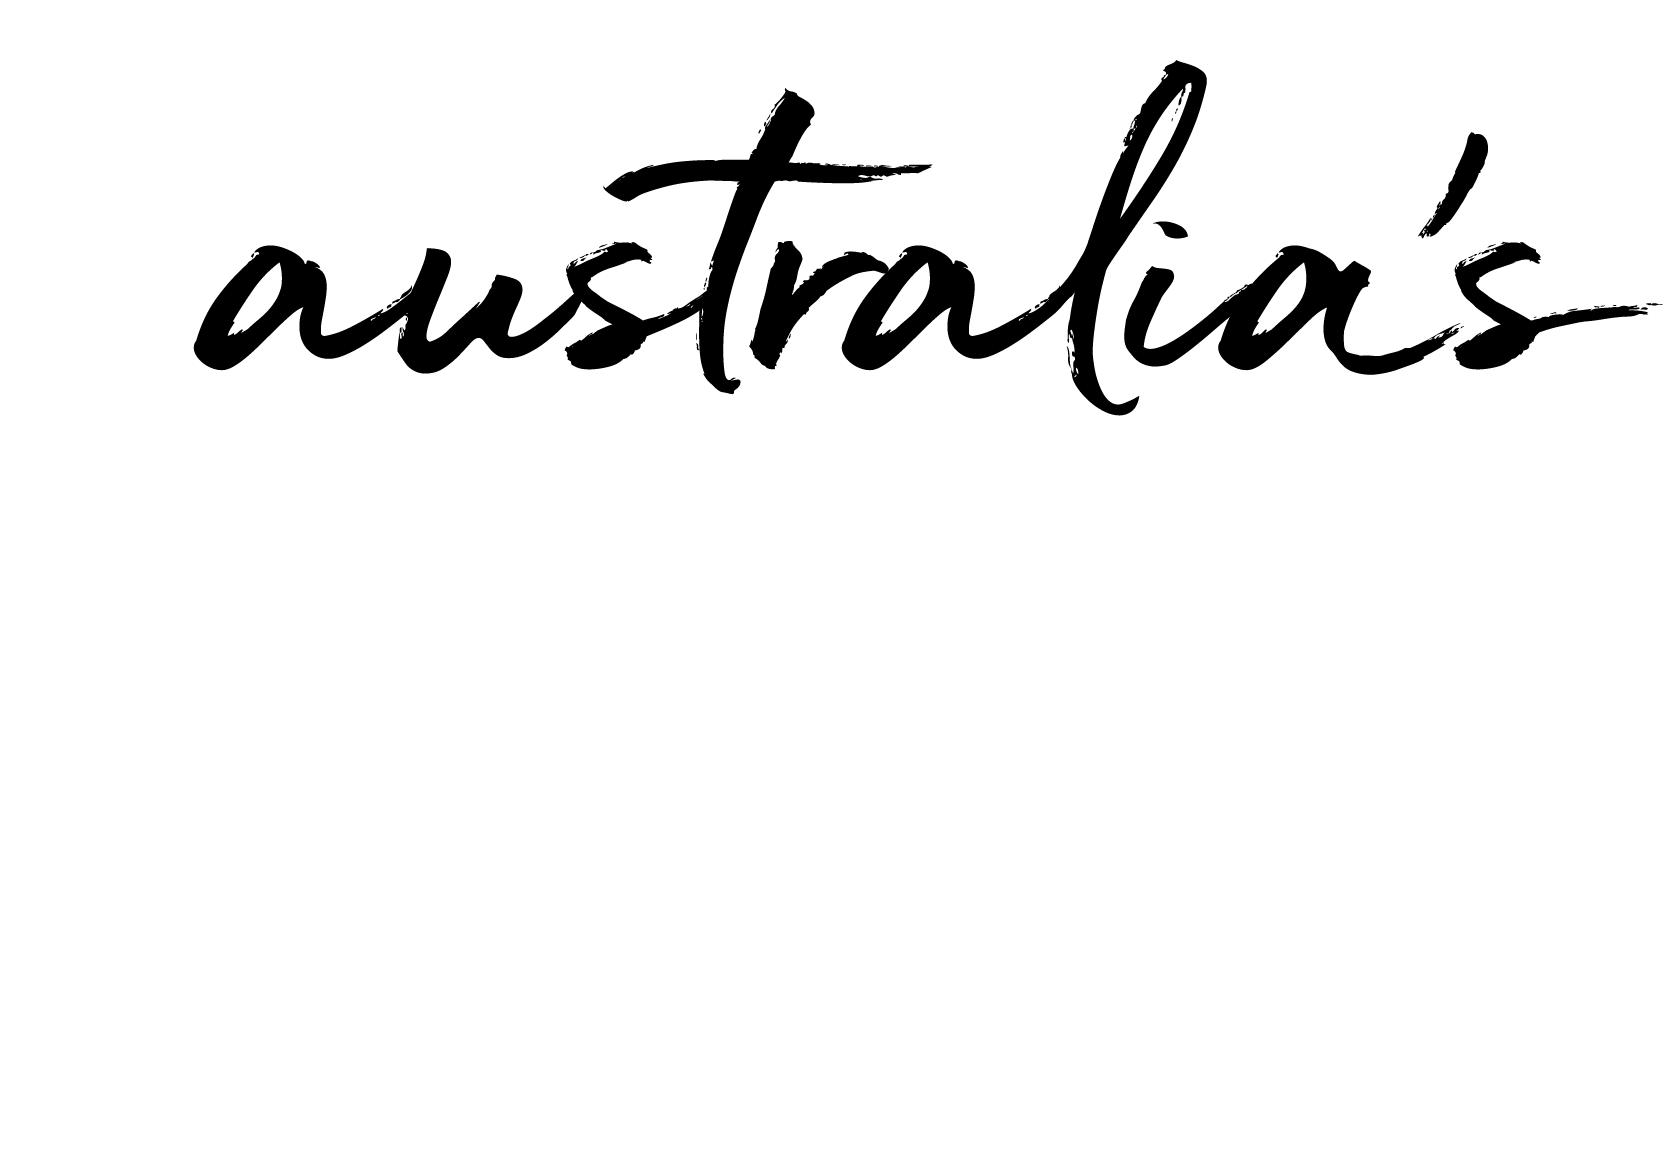 One of Australia's Largest Innovative Produce Suppliers